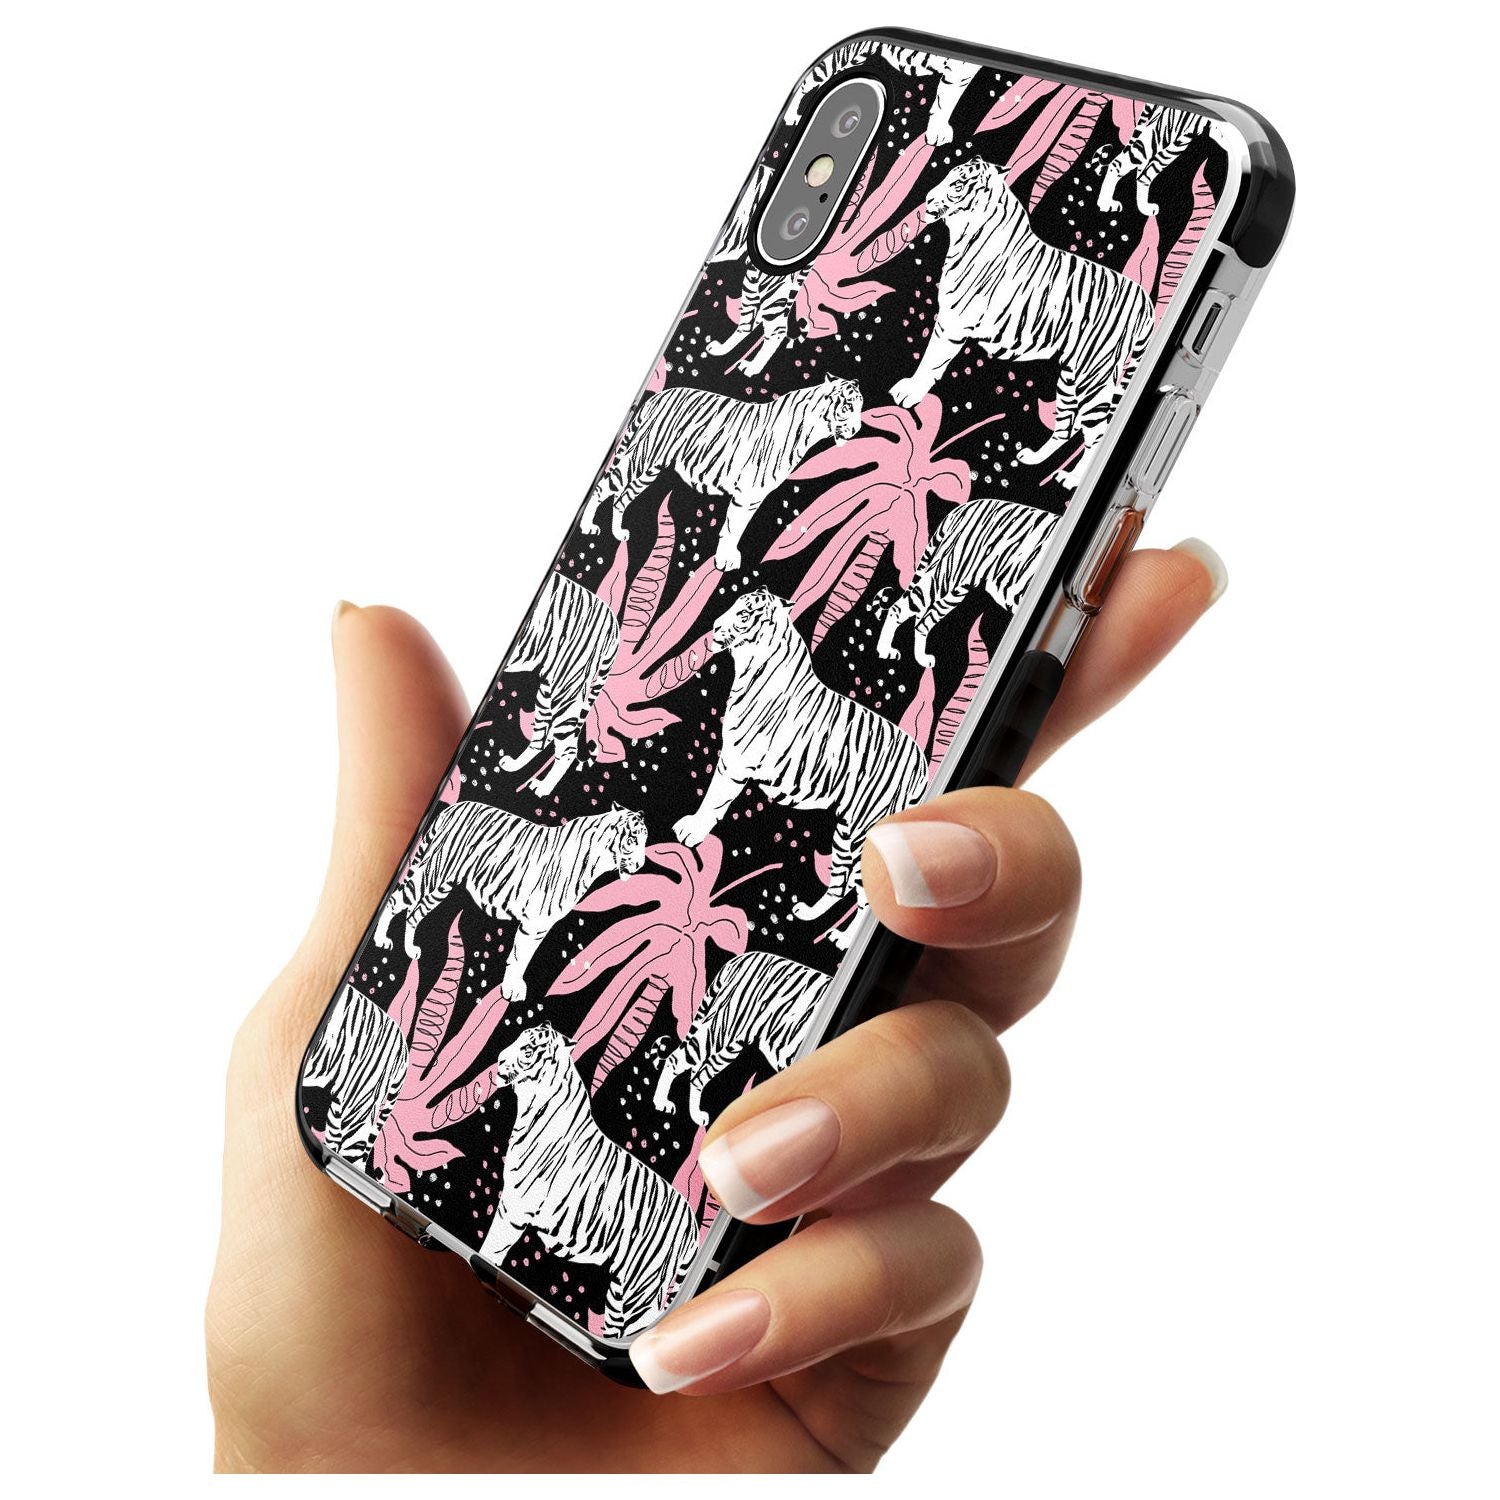 White Tigers on Black Pattern Black Impact Phone Case for iPhone X XS Max XR